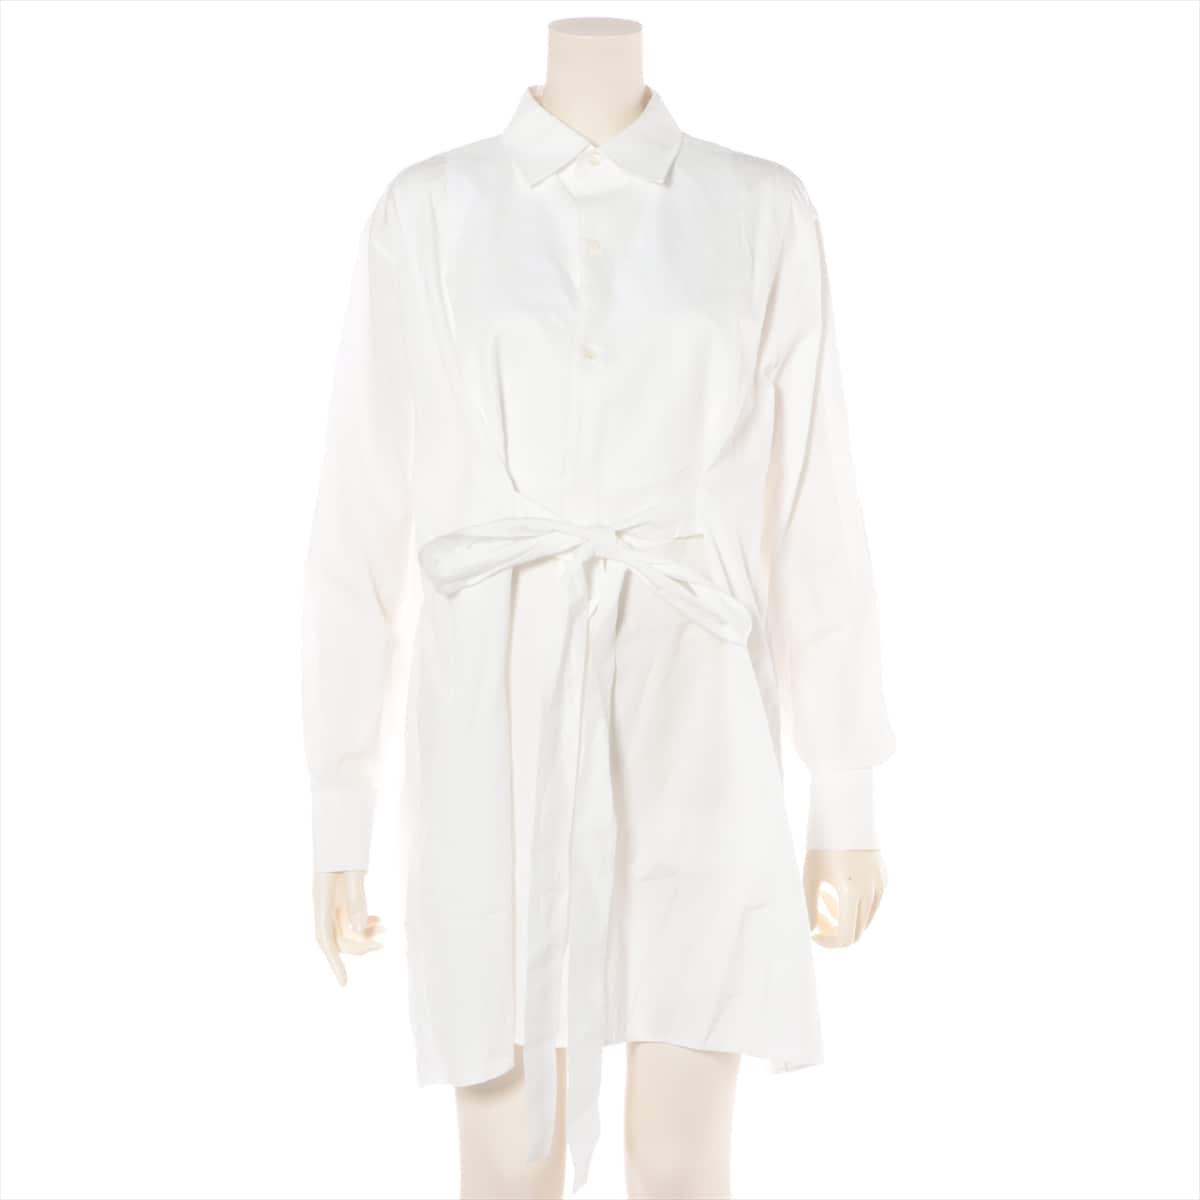 Christian Dior Cotton Shirt dress F36 Ladies' White  Bee embroidery 8C21531L1356